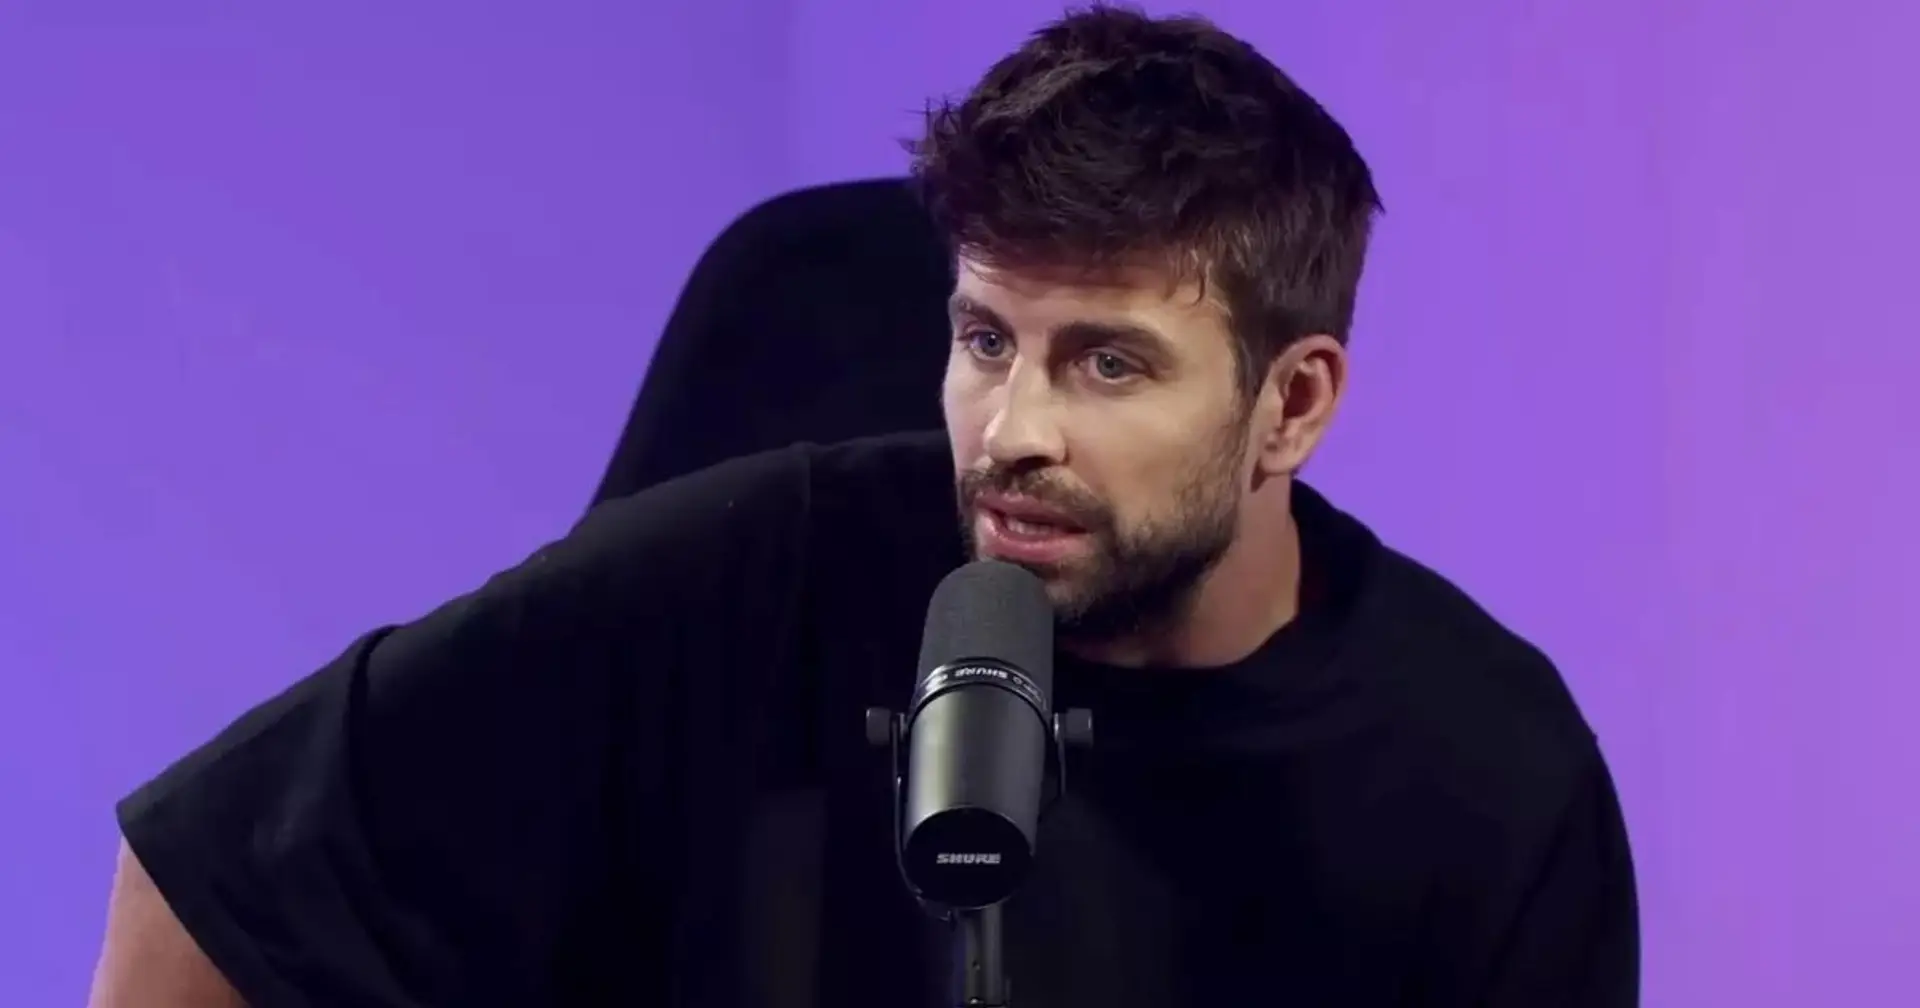 'I watch maybe 30-40 mins of Barca': Pique explains how football matches must adapt to compete with Netflix & TikTok